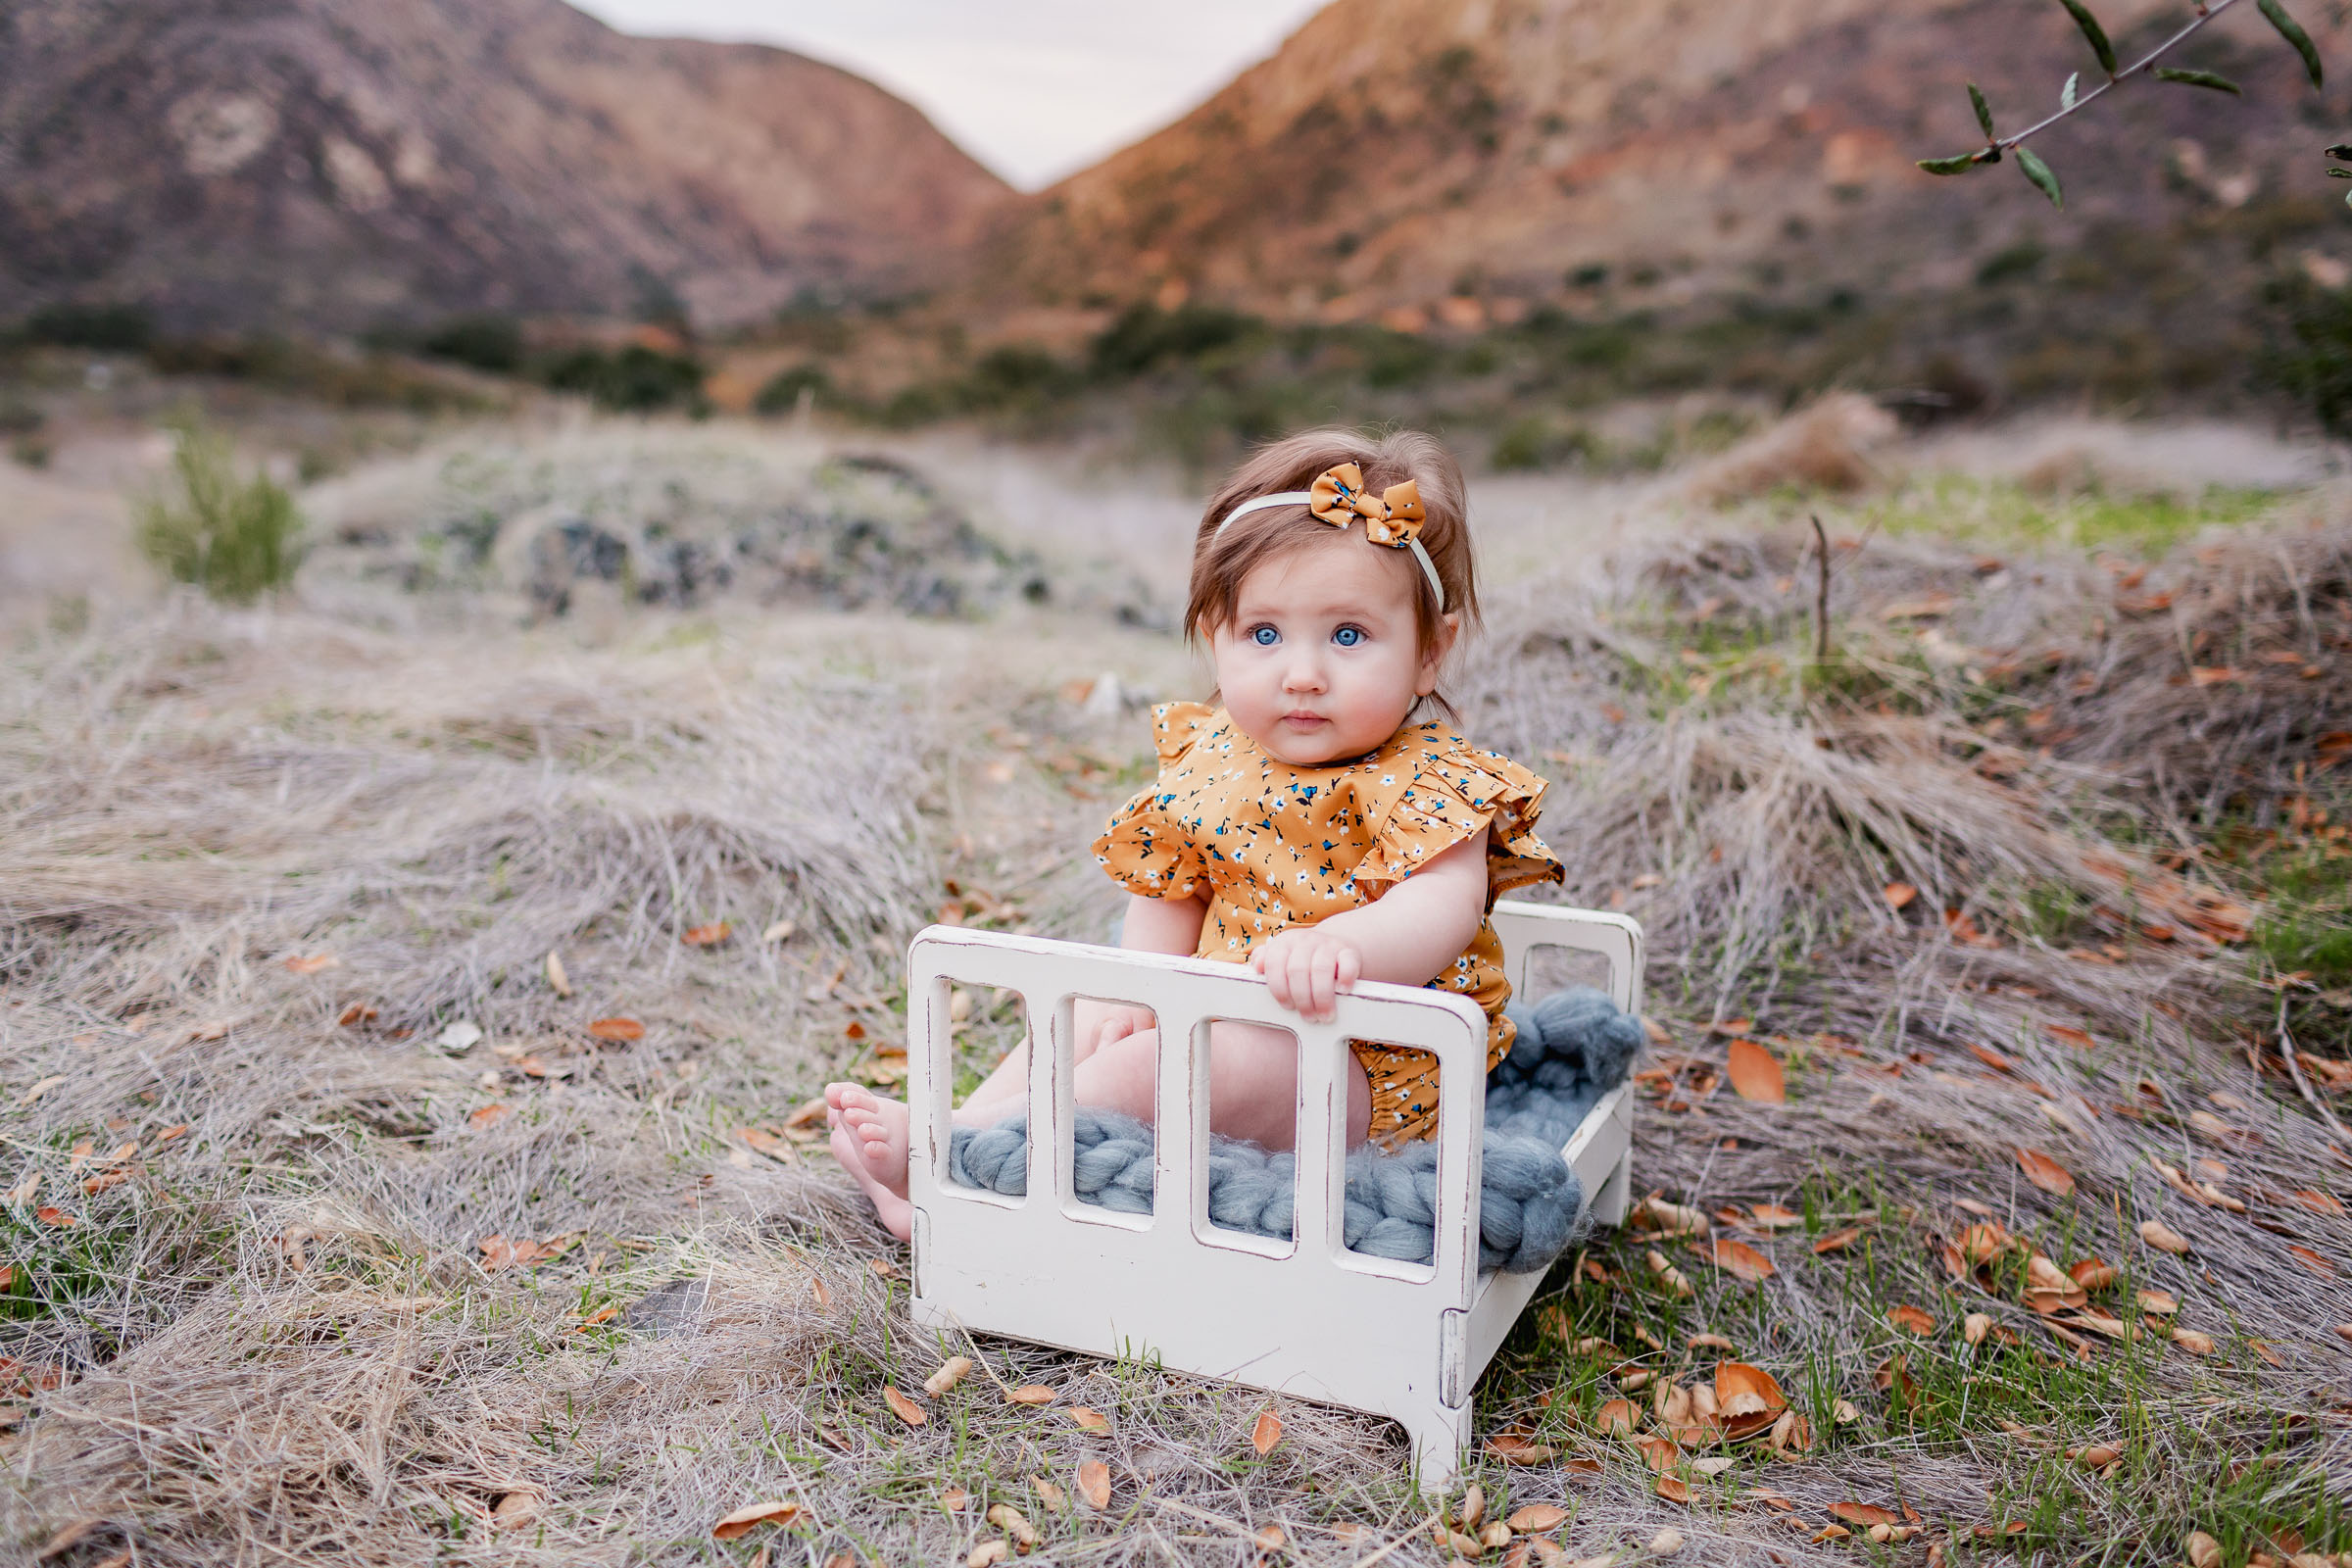 Outdoor 6 month milestone photo of girl in a yellow outfit with blue flowers on it with Mission Trails in the background